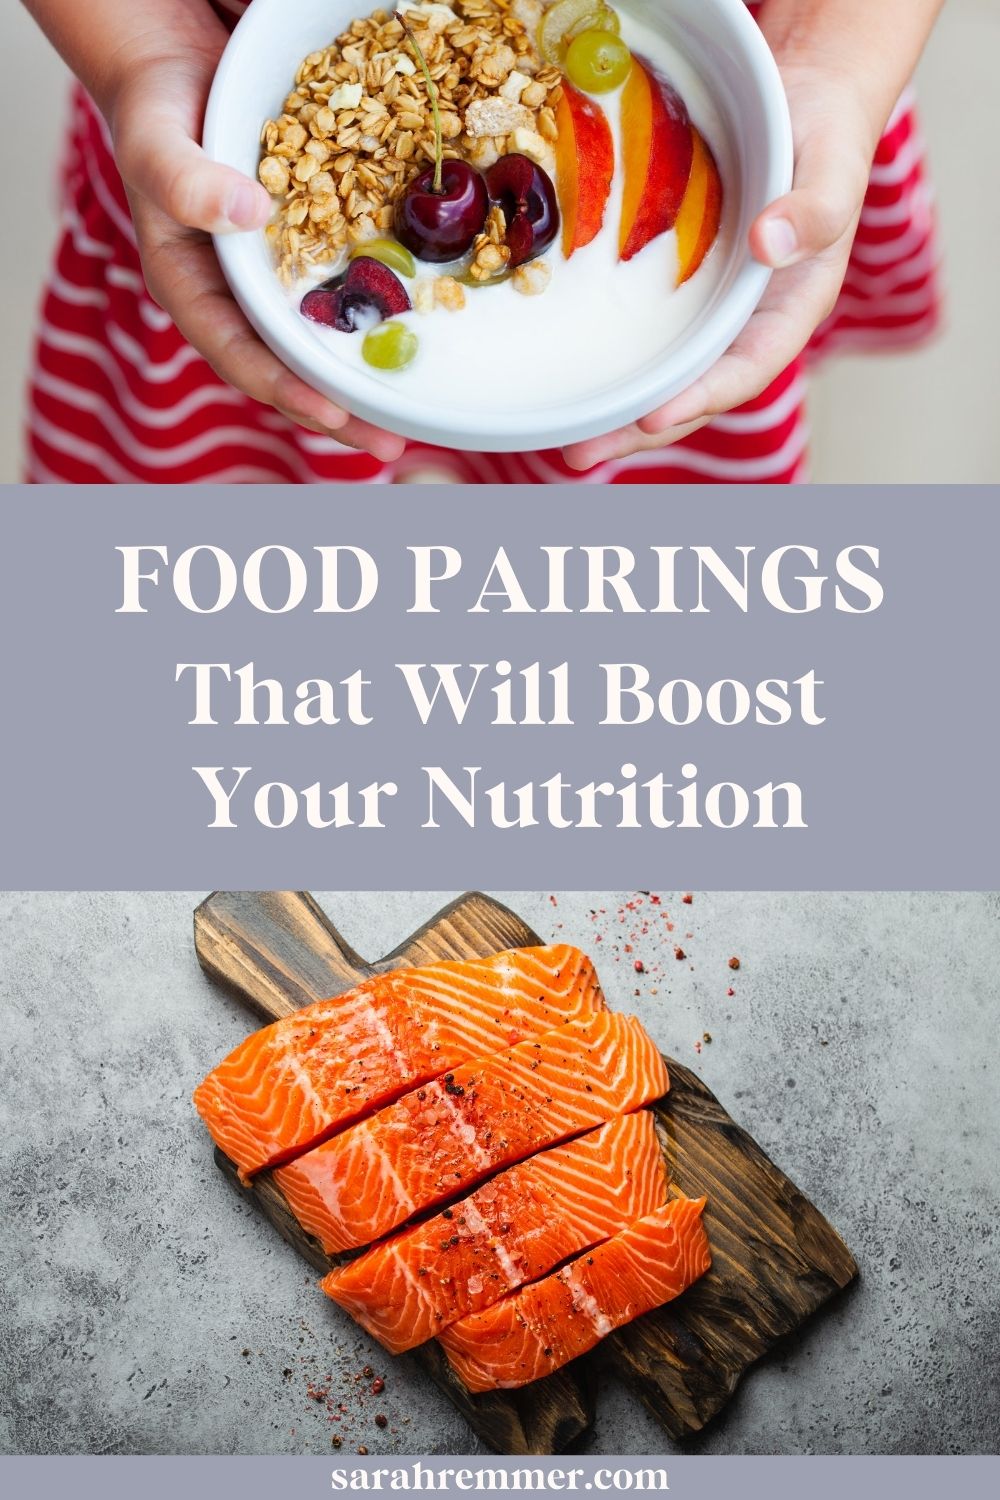 Food Pairings That Will Boost You Nutrition